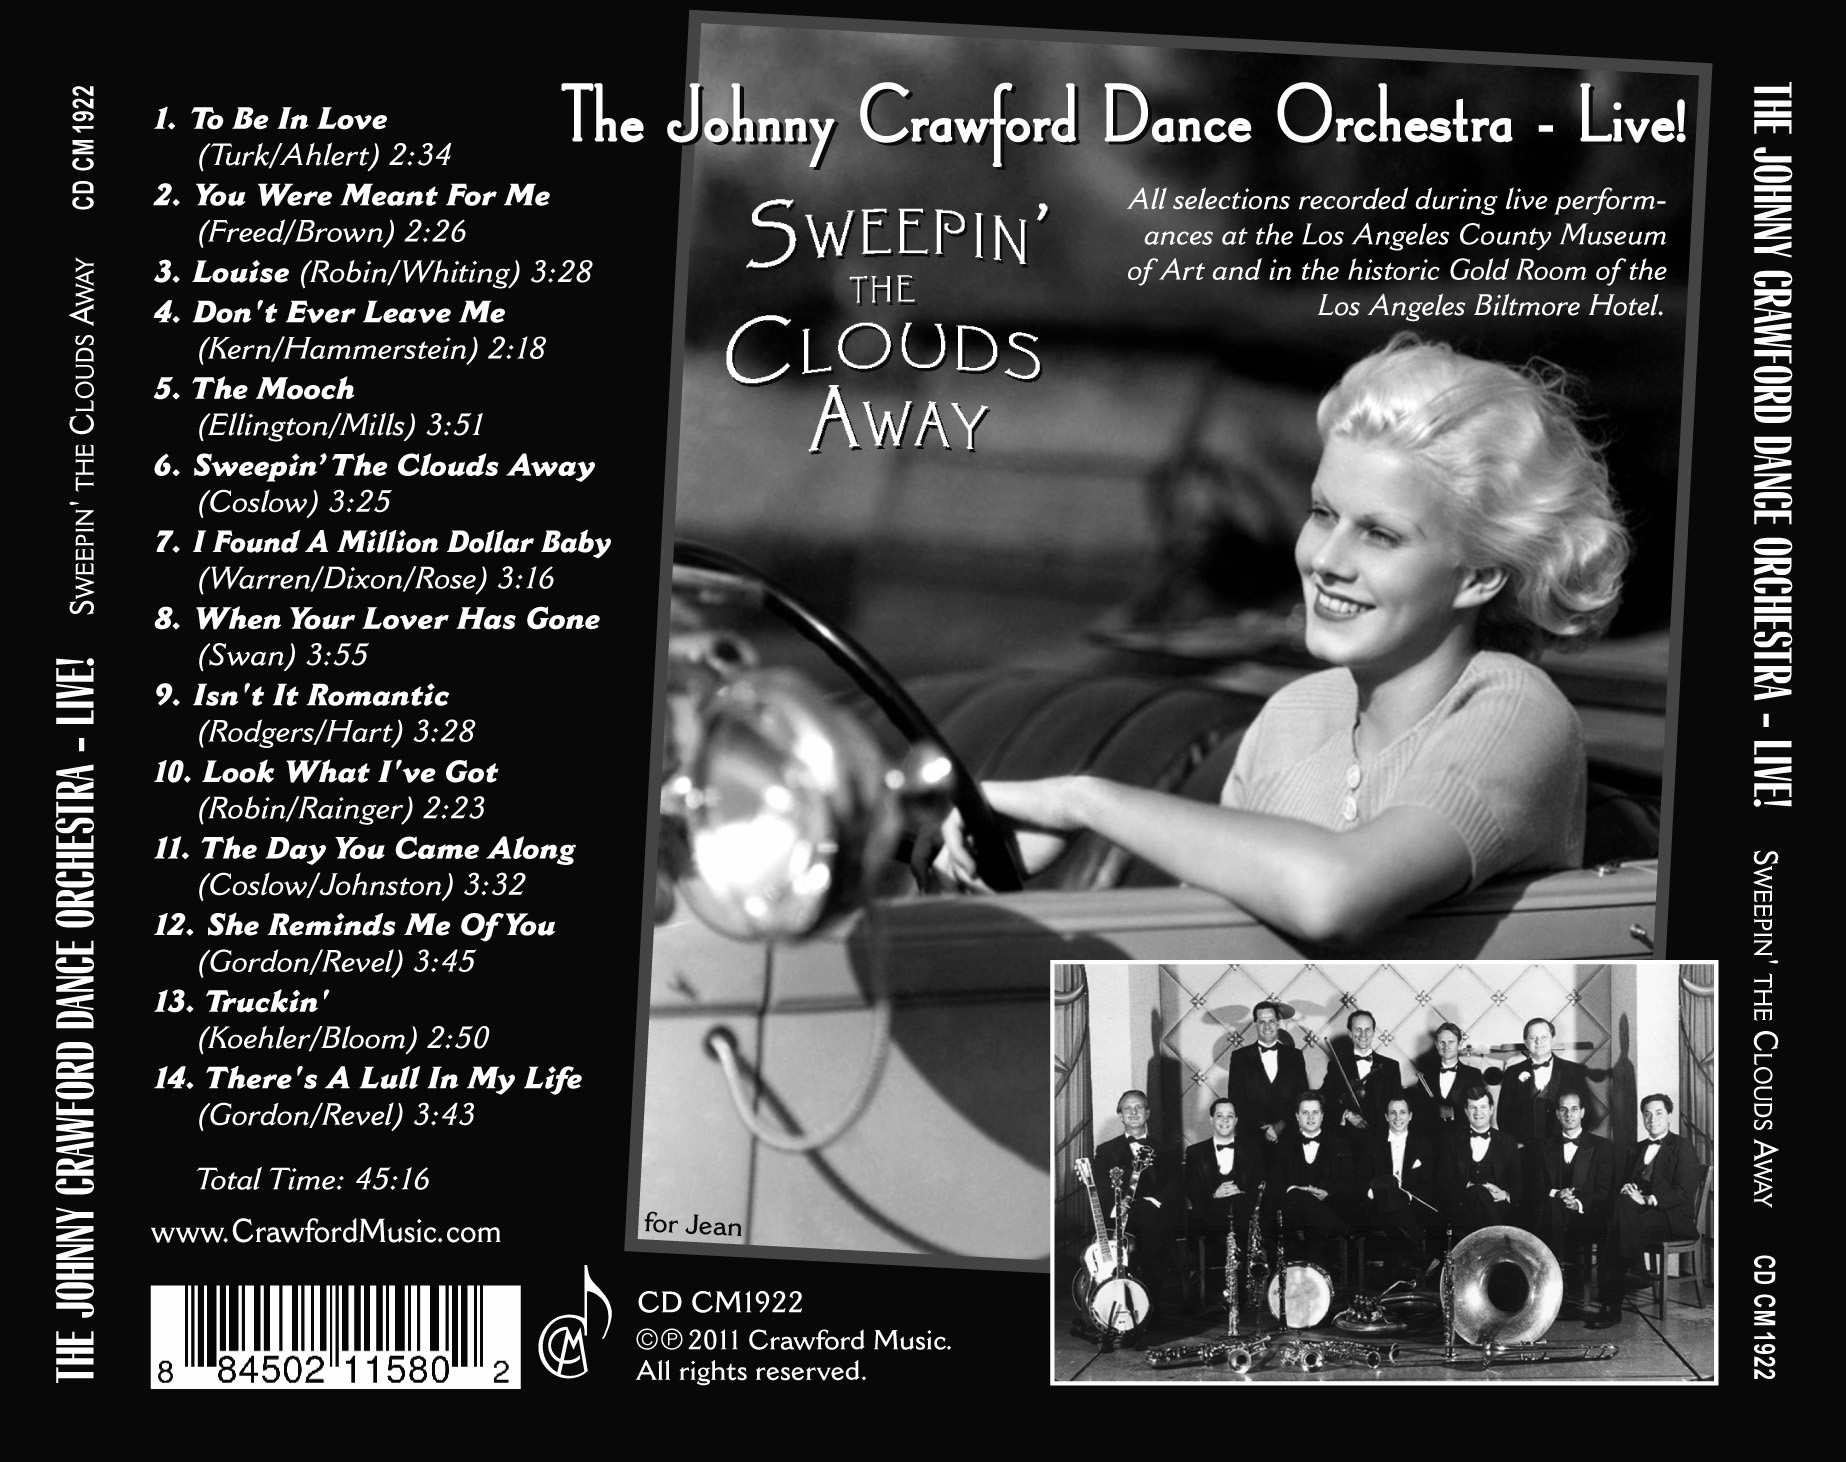 Sweepin' the Clouds Away (remastered) 2011 music CD back cover with images of Jean Harlow and the Johnny Crawford Dance Orchestra